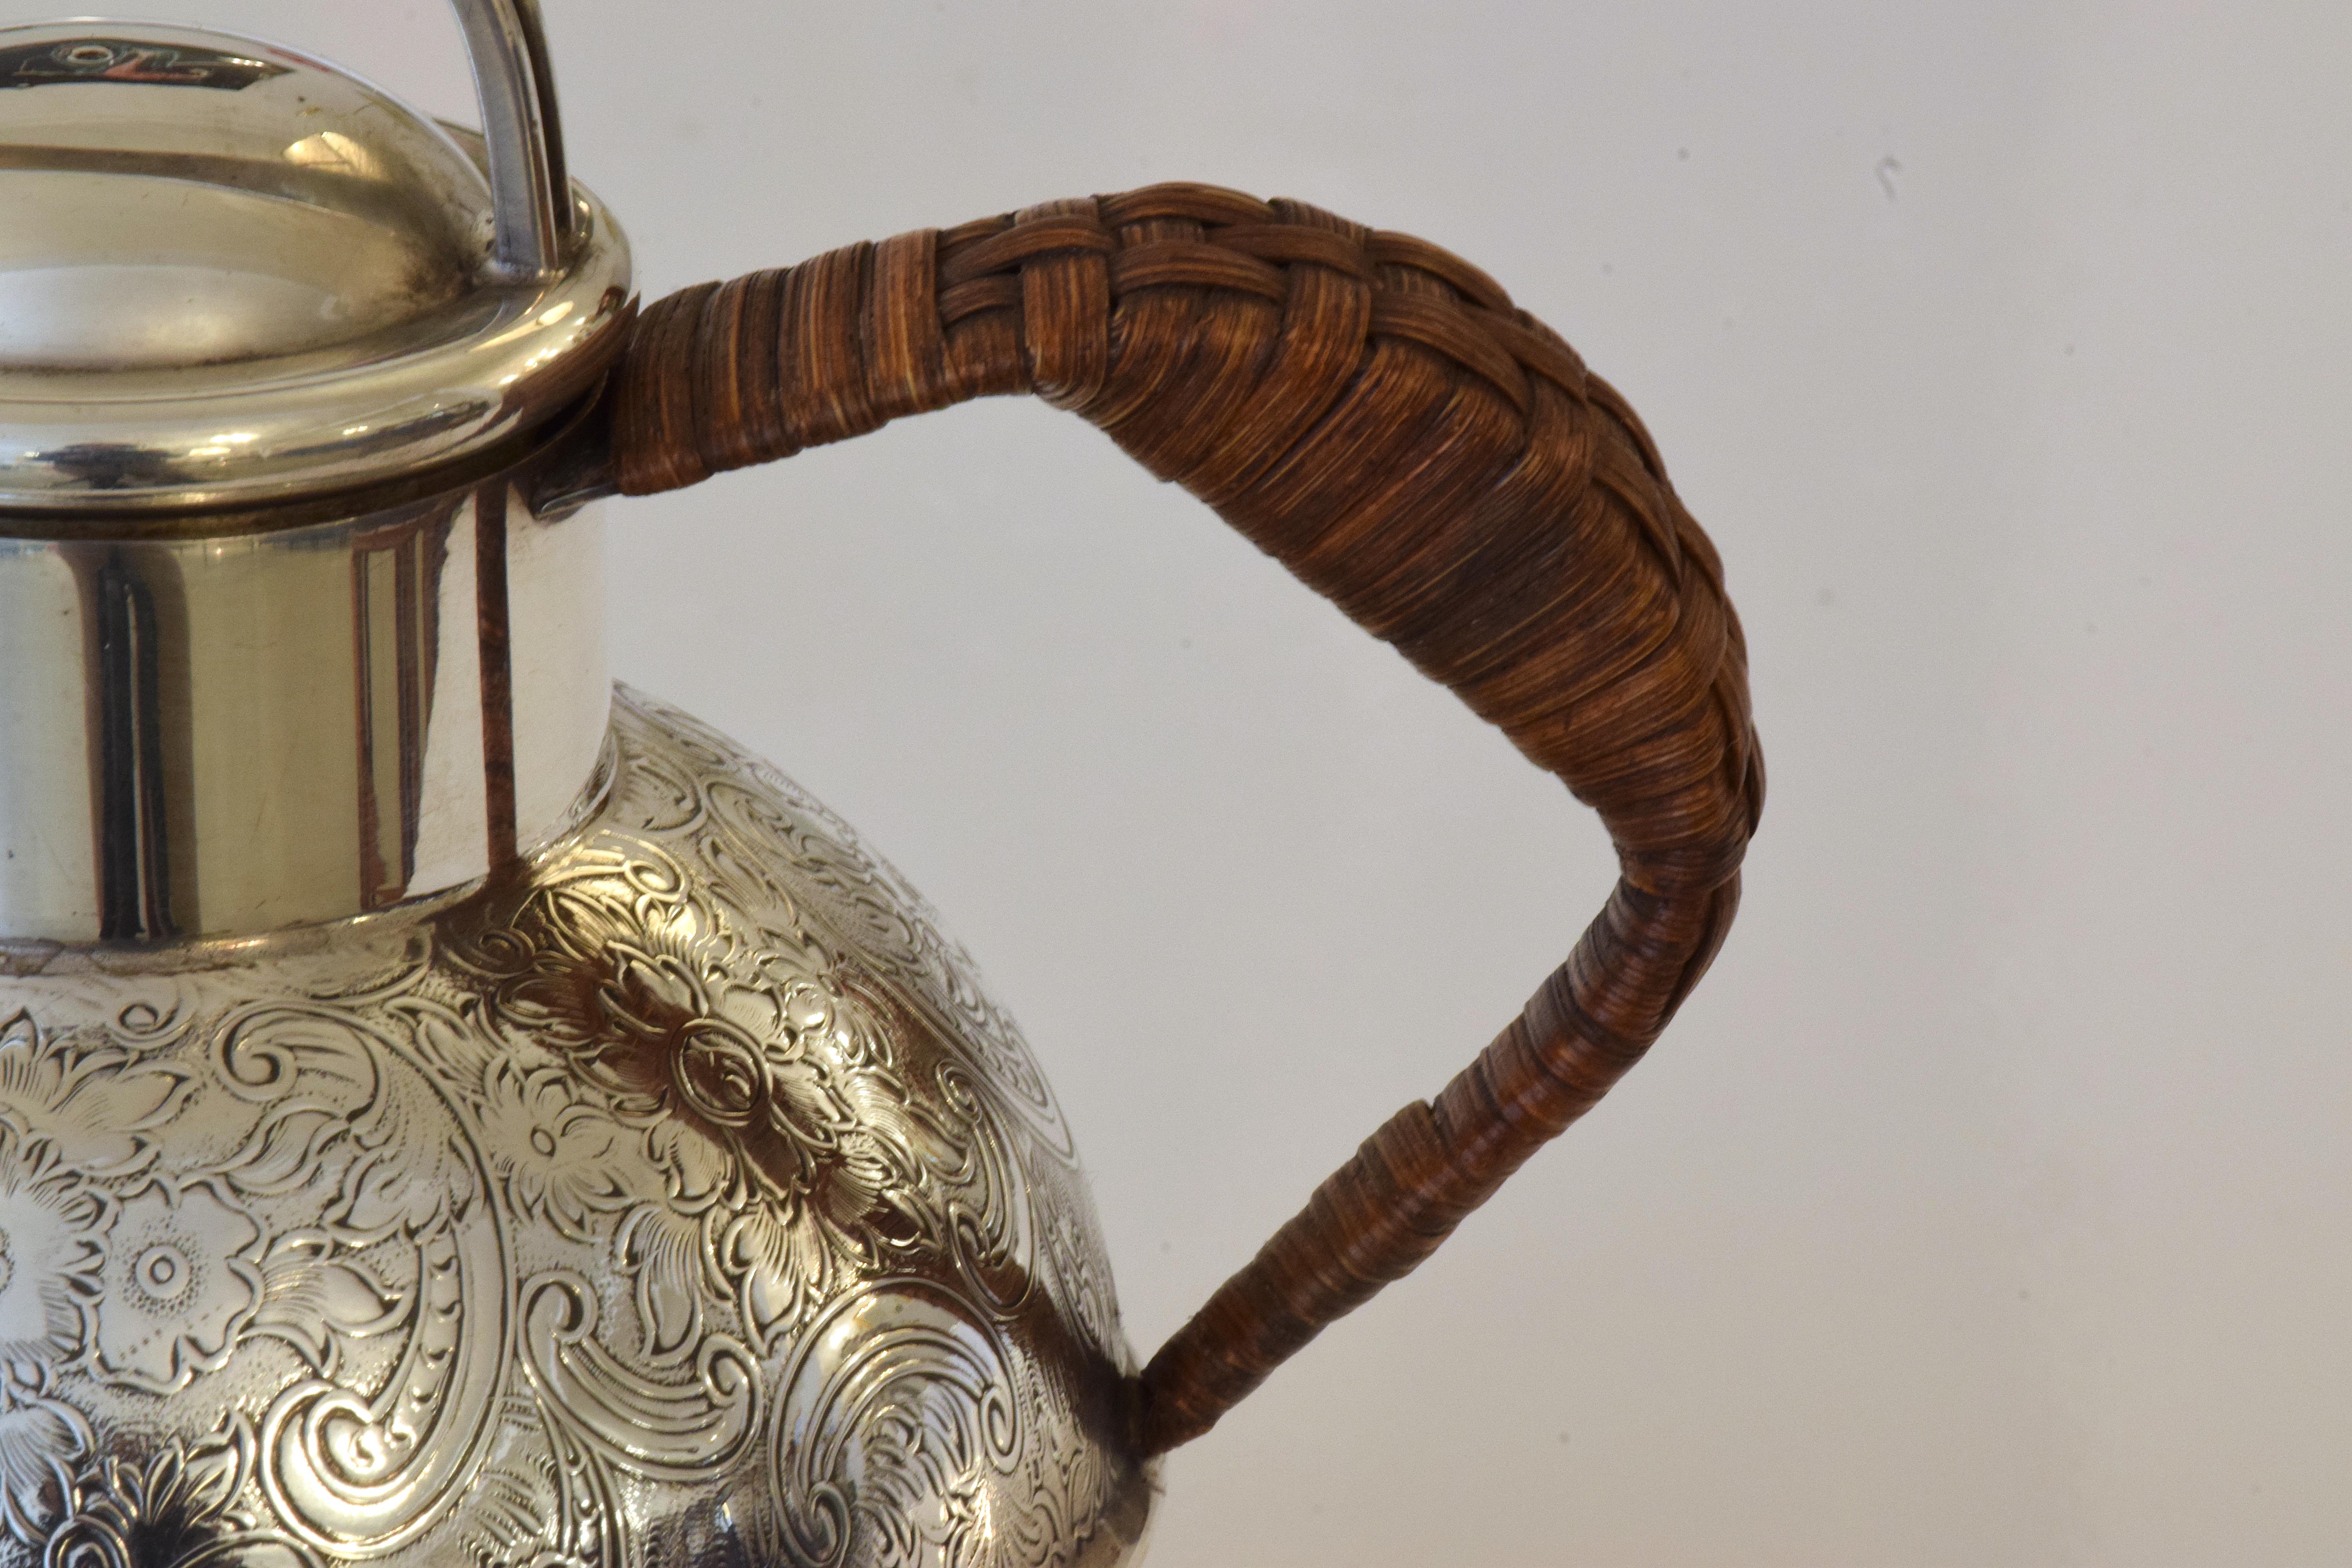 A sterling silver teapot from the early 20th century by Bailey Banks & Biddle. A small design initially created for boats composed of engravings and a plated wooden handle, makes a great decorative piece.